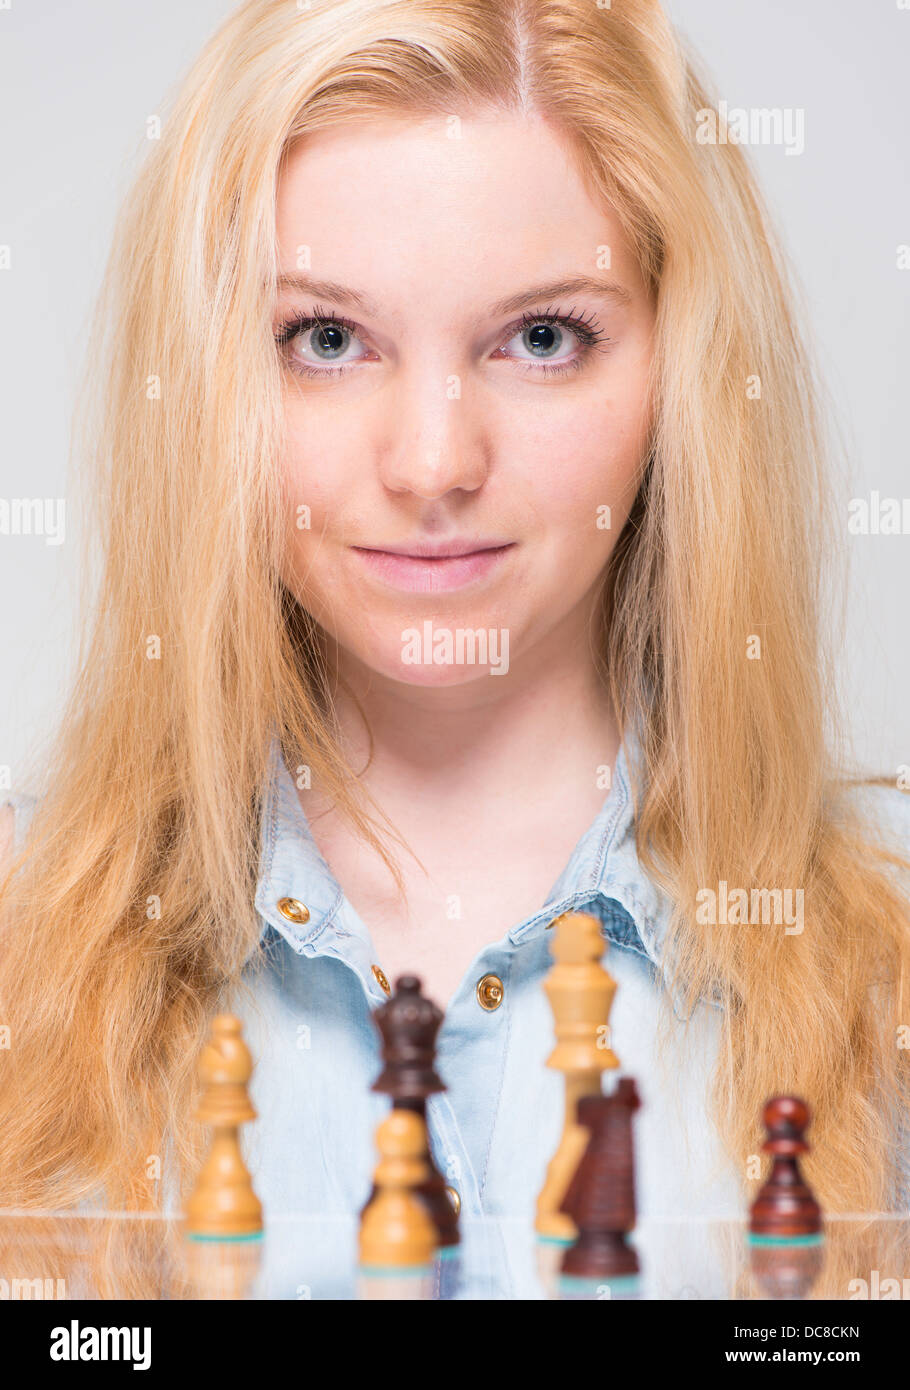 Young blonde woman and chess pieces Stock Photo